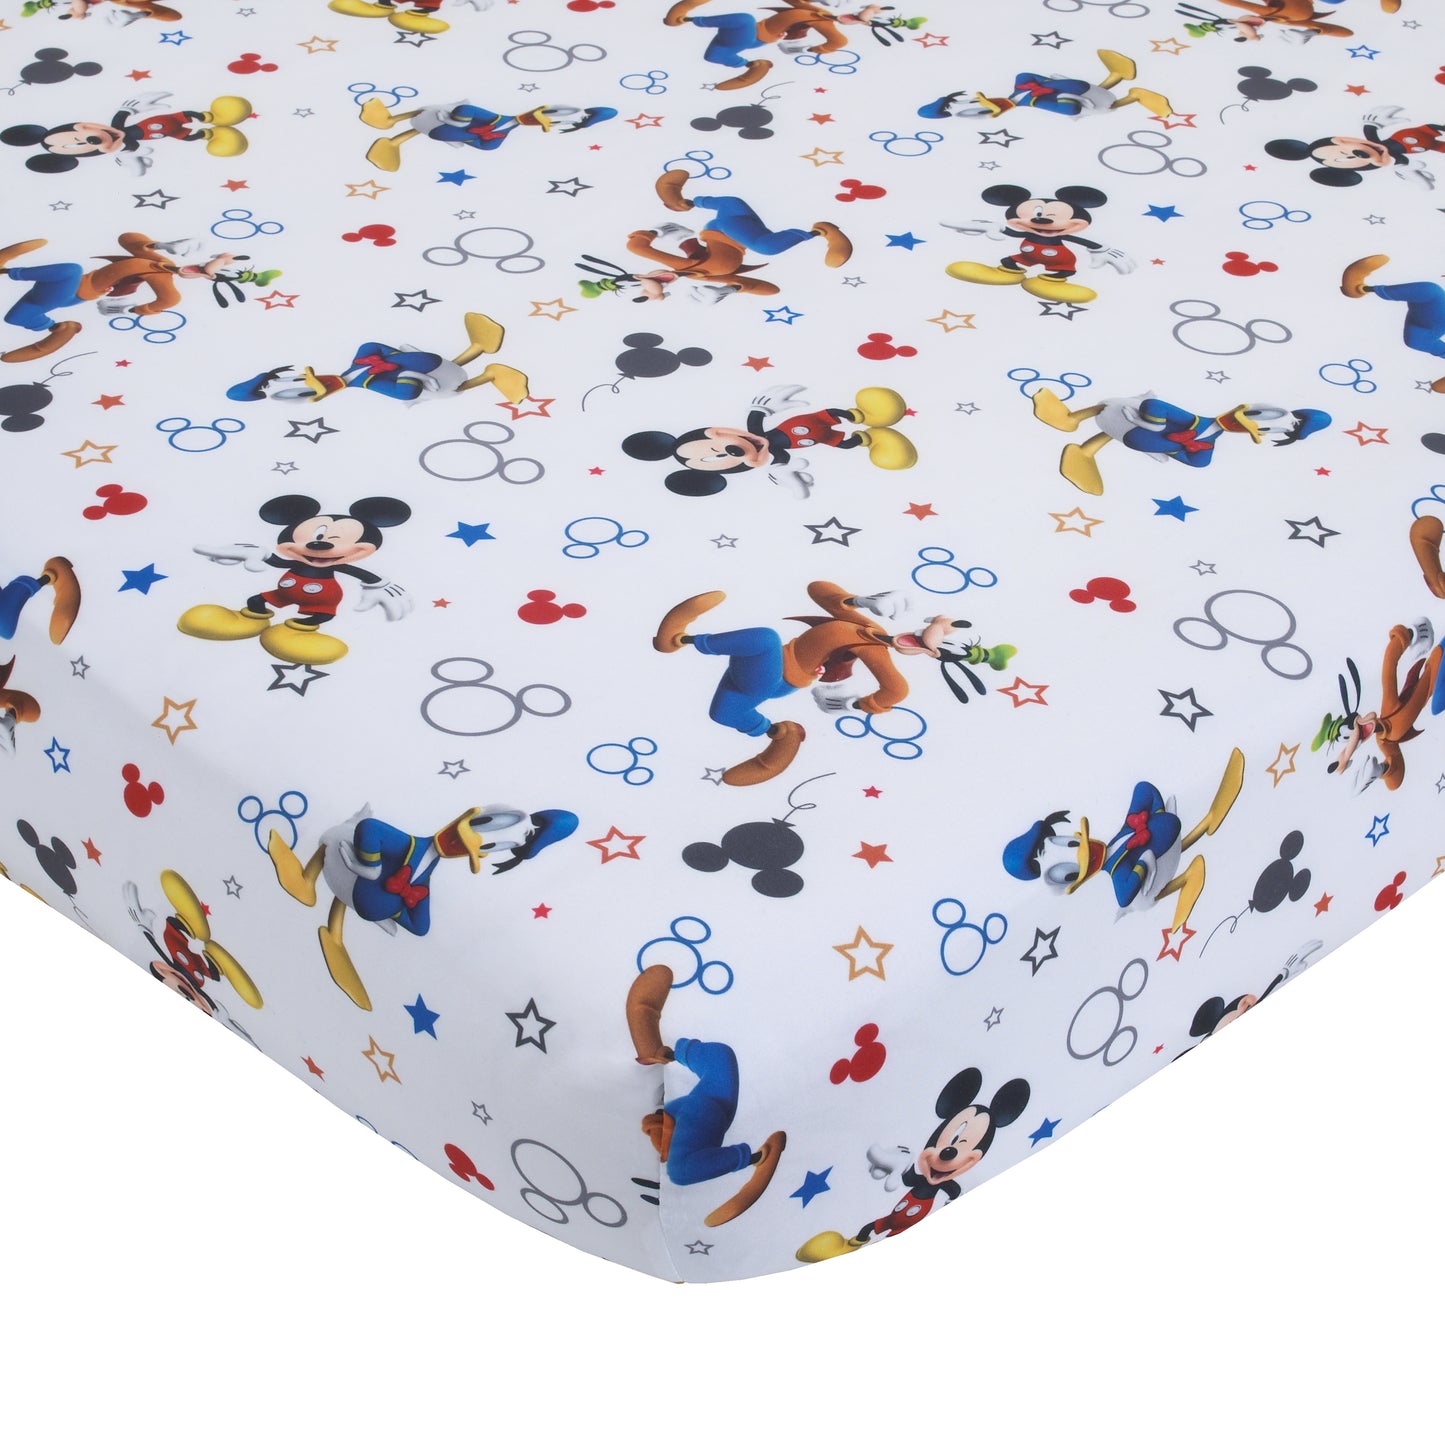 Disney Mickey Mouse Blue, Gray, Red, and White, Donald Duck, and Goofy Having Fun 4 Piece Toddler Bed Set - Comforter, Fitted Bottom Sheet, Flat Top Sheet, and Reversible Pillowcase